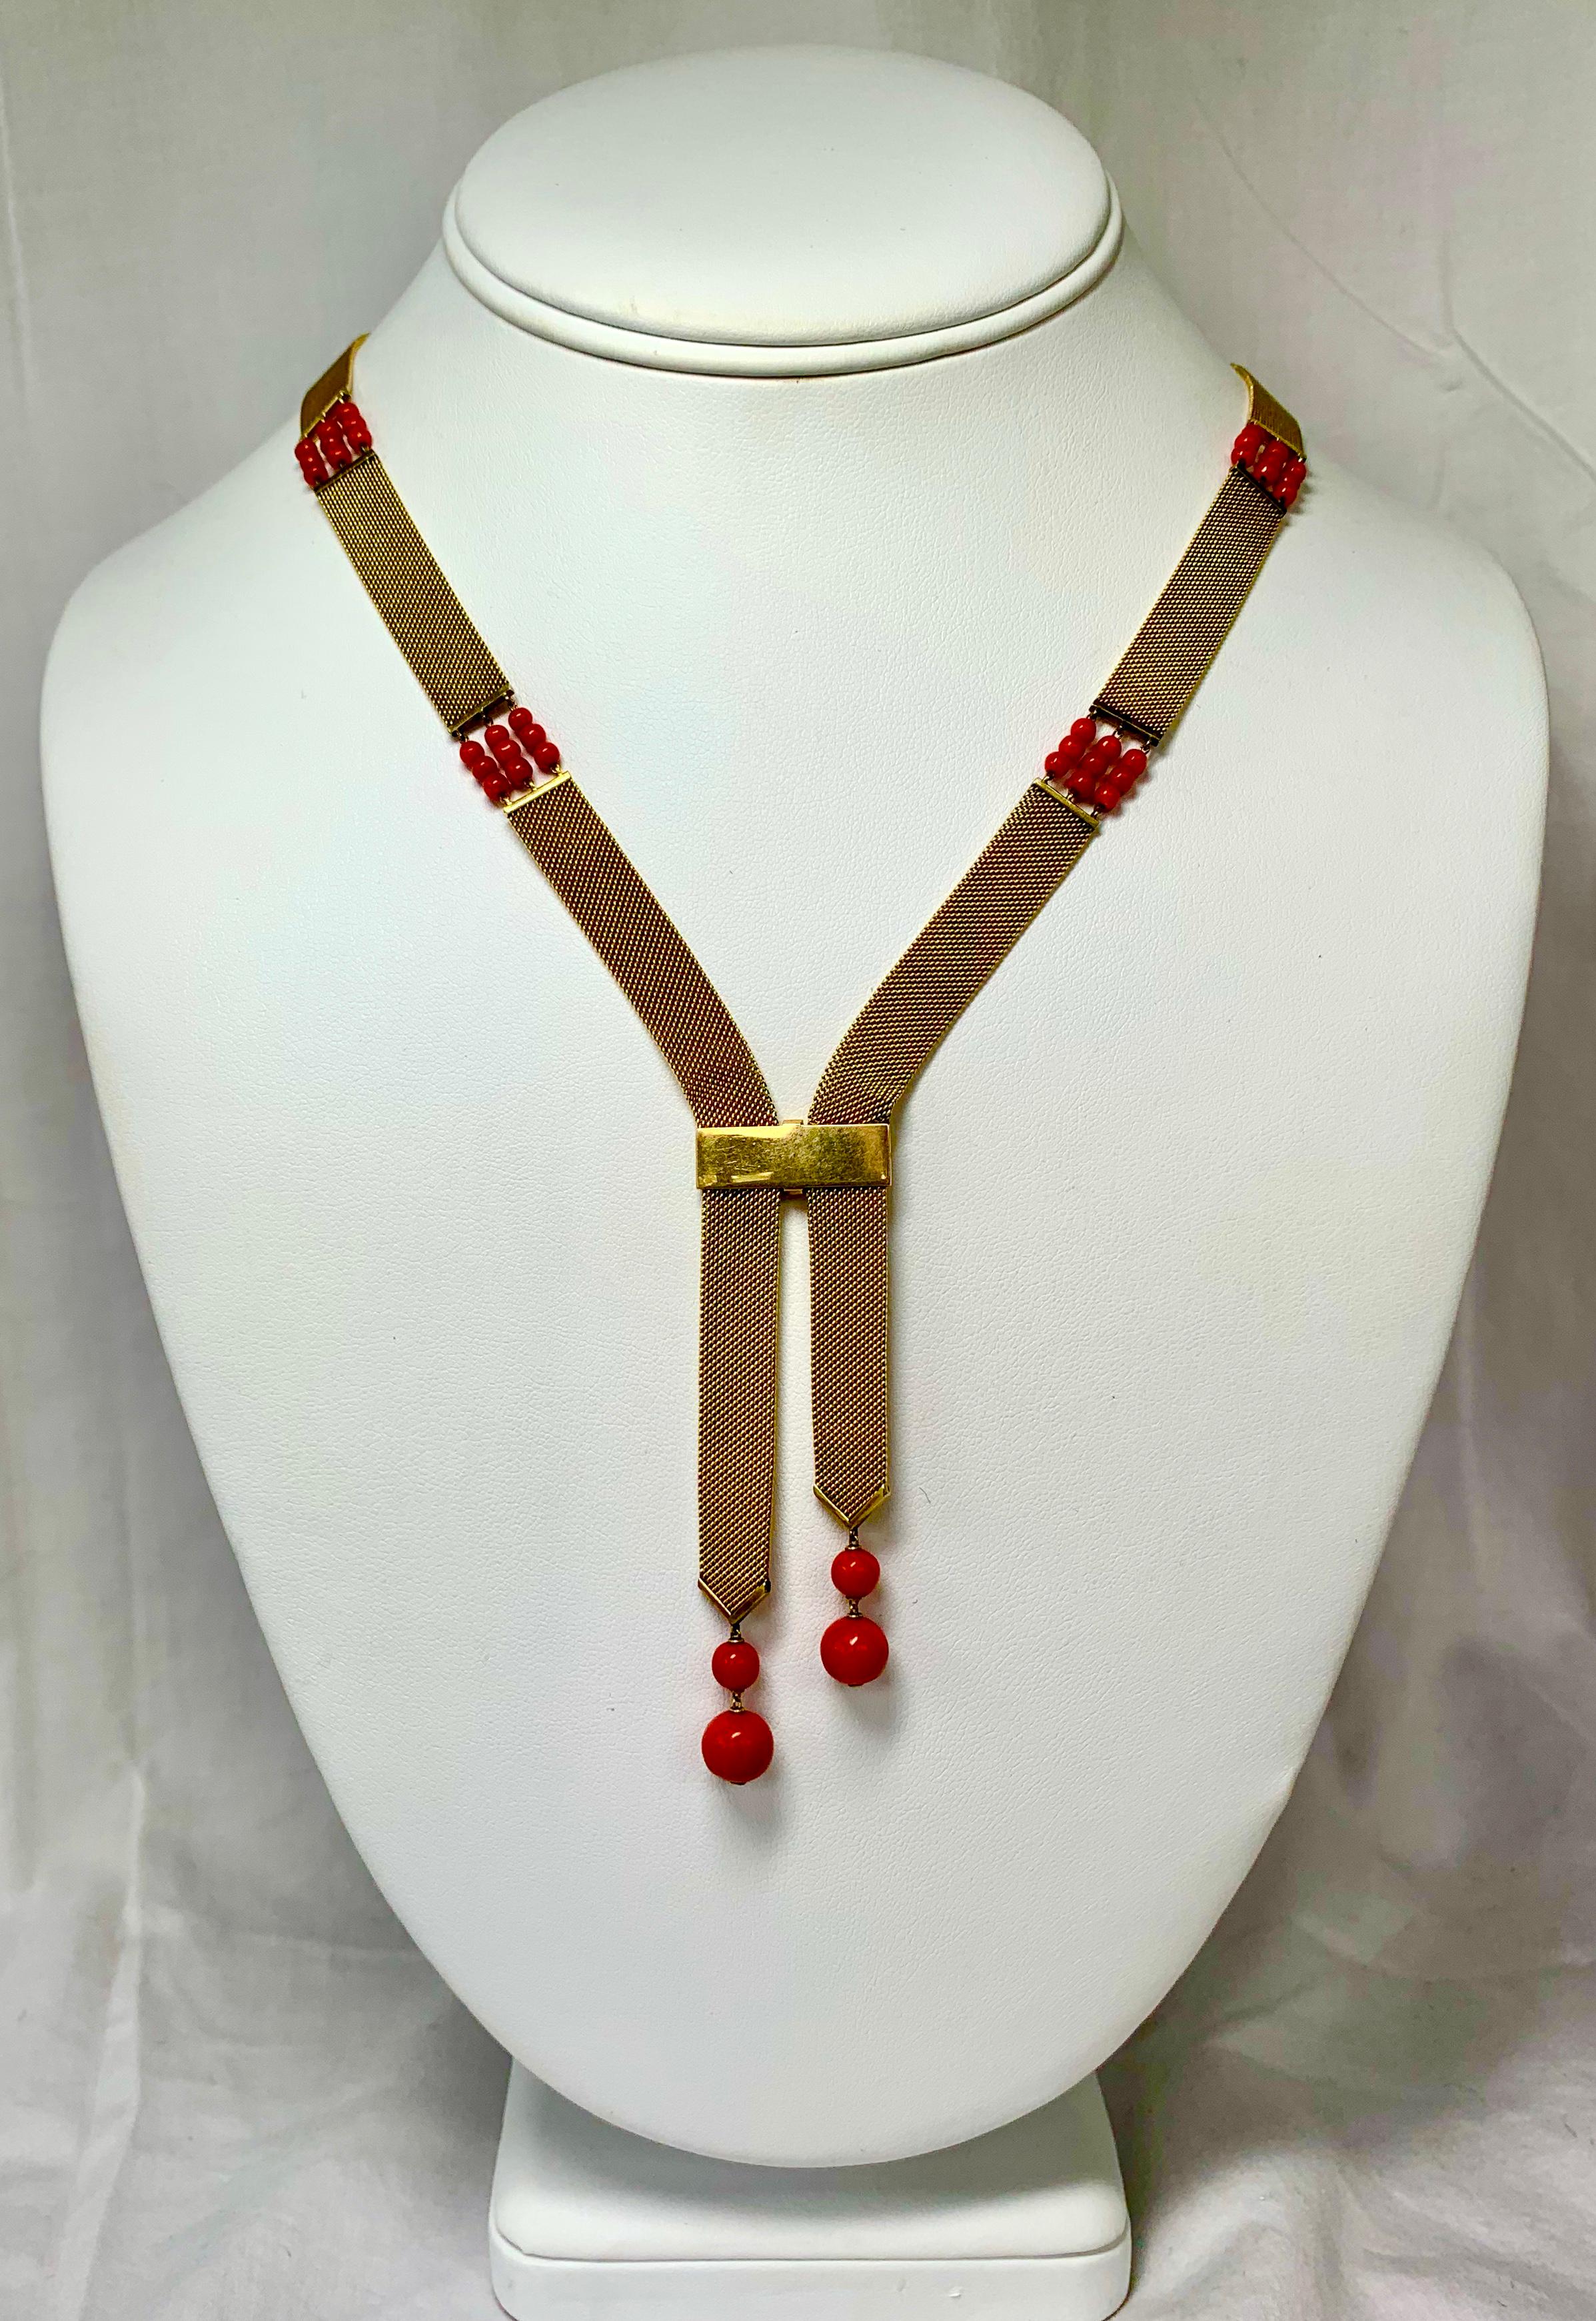 THIS IS A STUNNING ART DECO - EDWARDIAN - VICTORIAN NEGLIGEE NECKLACE OF GREAT BEAUTY.  THE NECKLACE IS COMPOSED OF GOLD MESH BANDS IN 14 KARAT GOLD.  THE MESH BANDS ARE DECORATED WITH CHAINS OF NATURAL RED CORAL BEADS AND THE TWO PENDANT ENDS HAVE